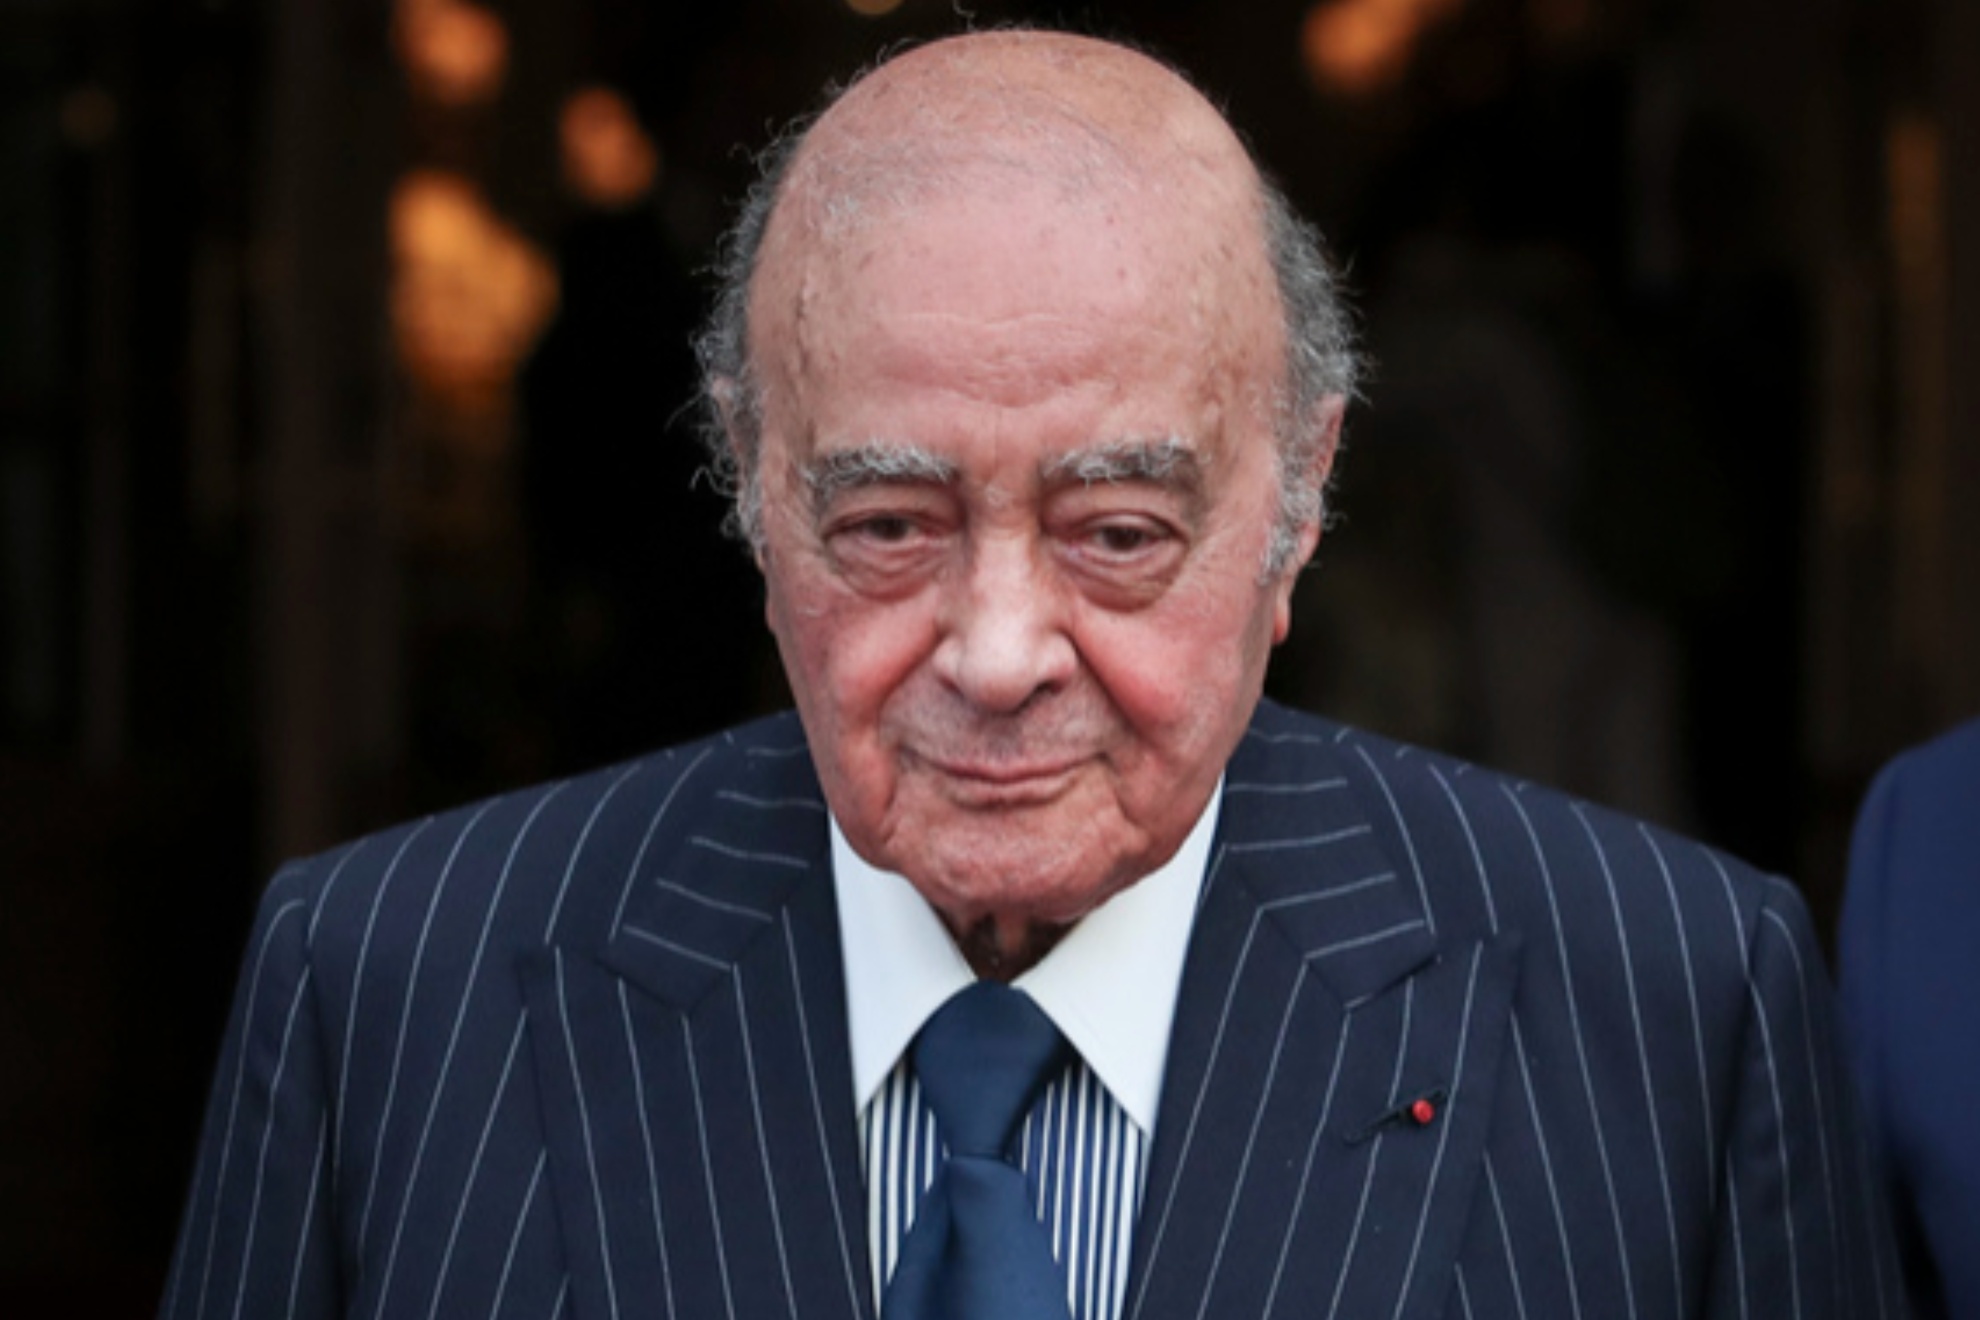 Al Fayed was 94 years old at the time of his death and was worth an estimated $2 billion dollars